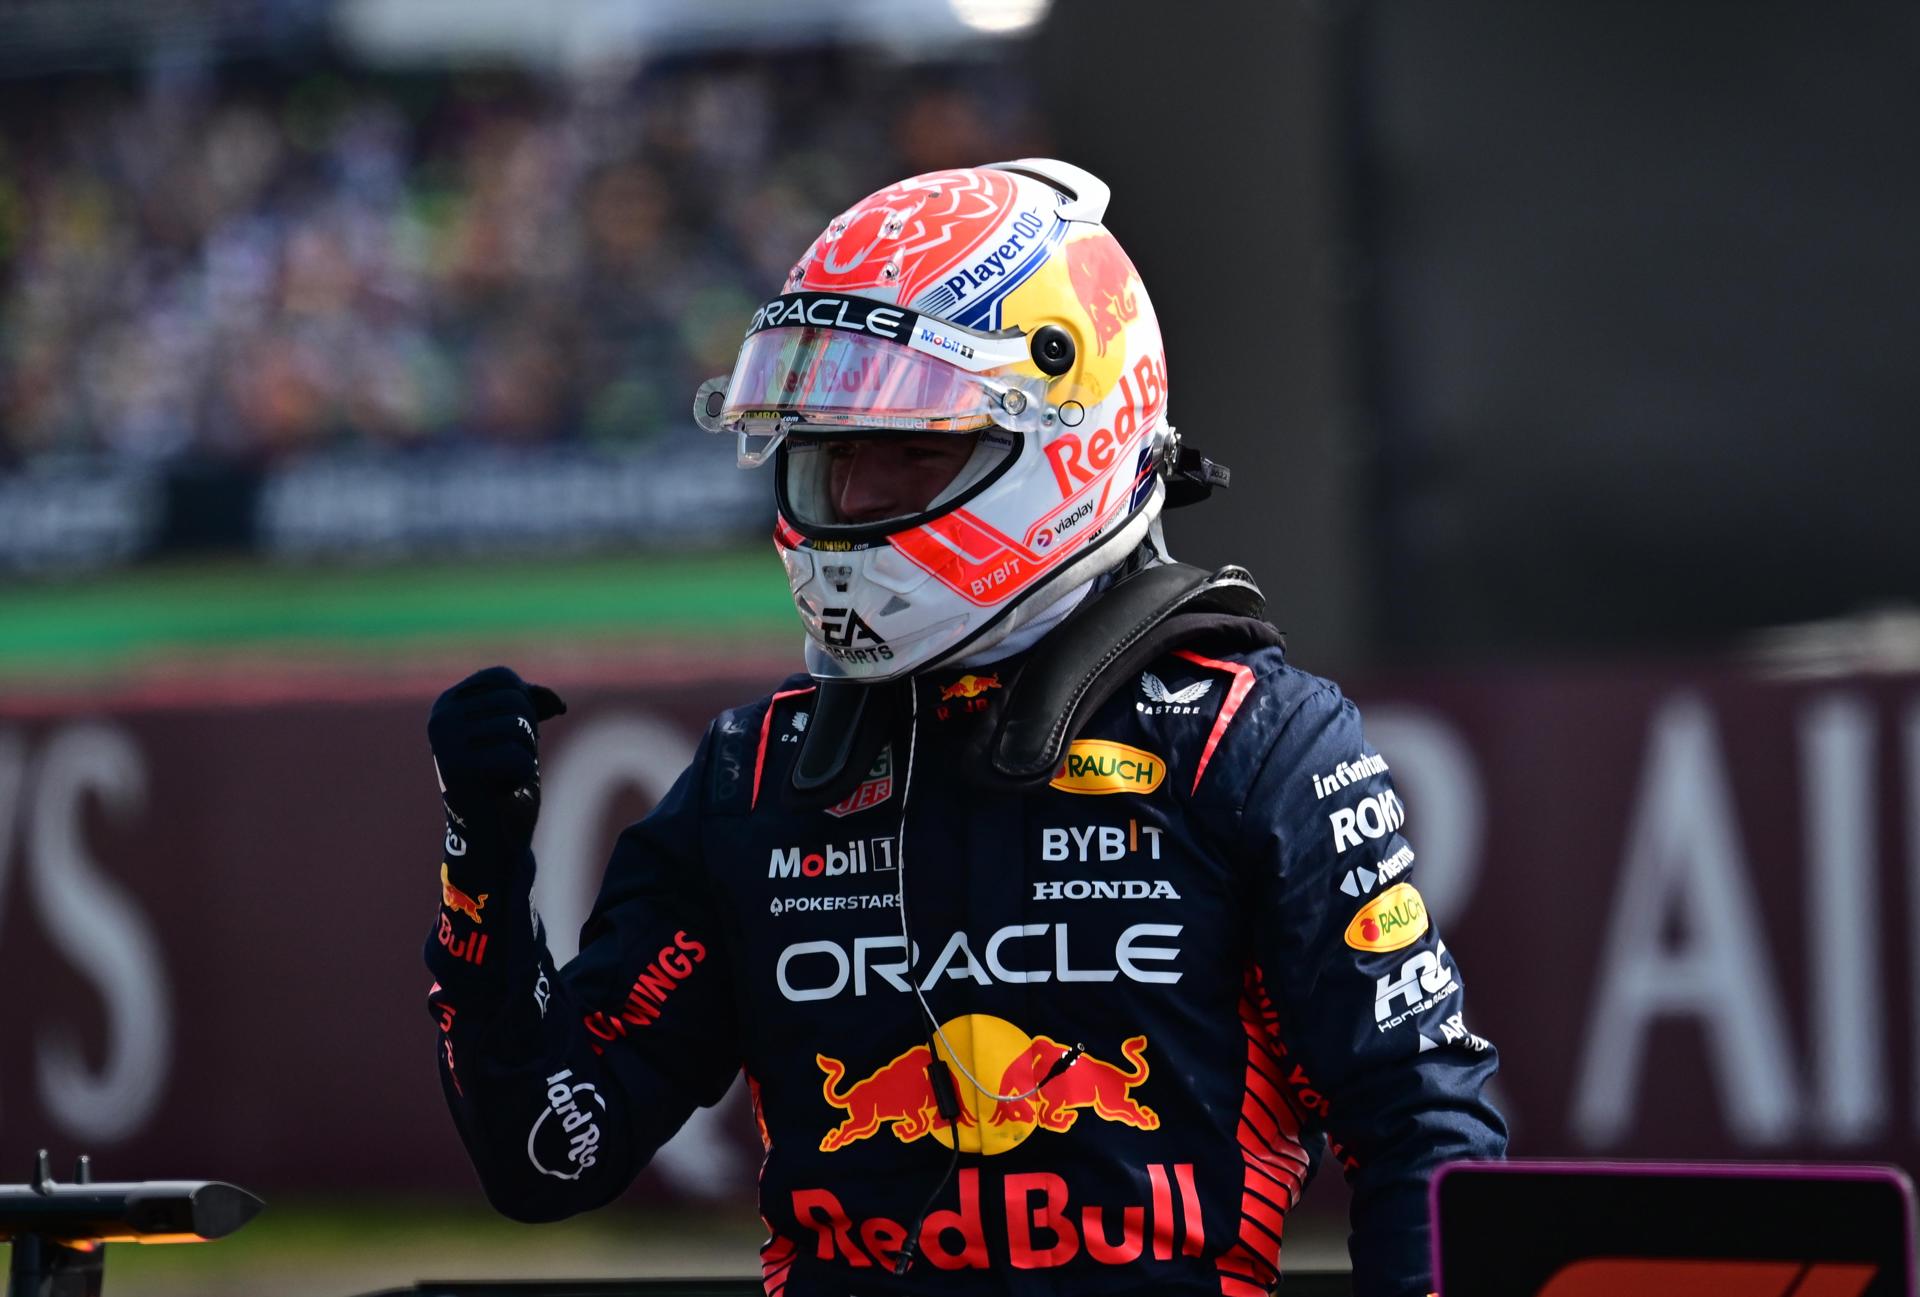 Formula One driver Max Verstappen (Red Bull) reacts after taking pole position in qualifying for the British Grand Prix at the Silverstone Circuit in Silverstone, England, on 8 July 2023. EFE/EPA/CHRISTIAN BRUNA